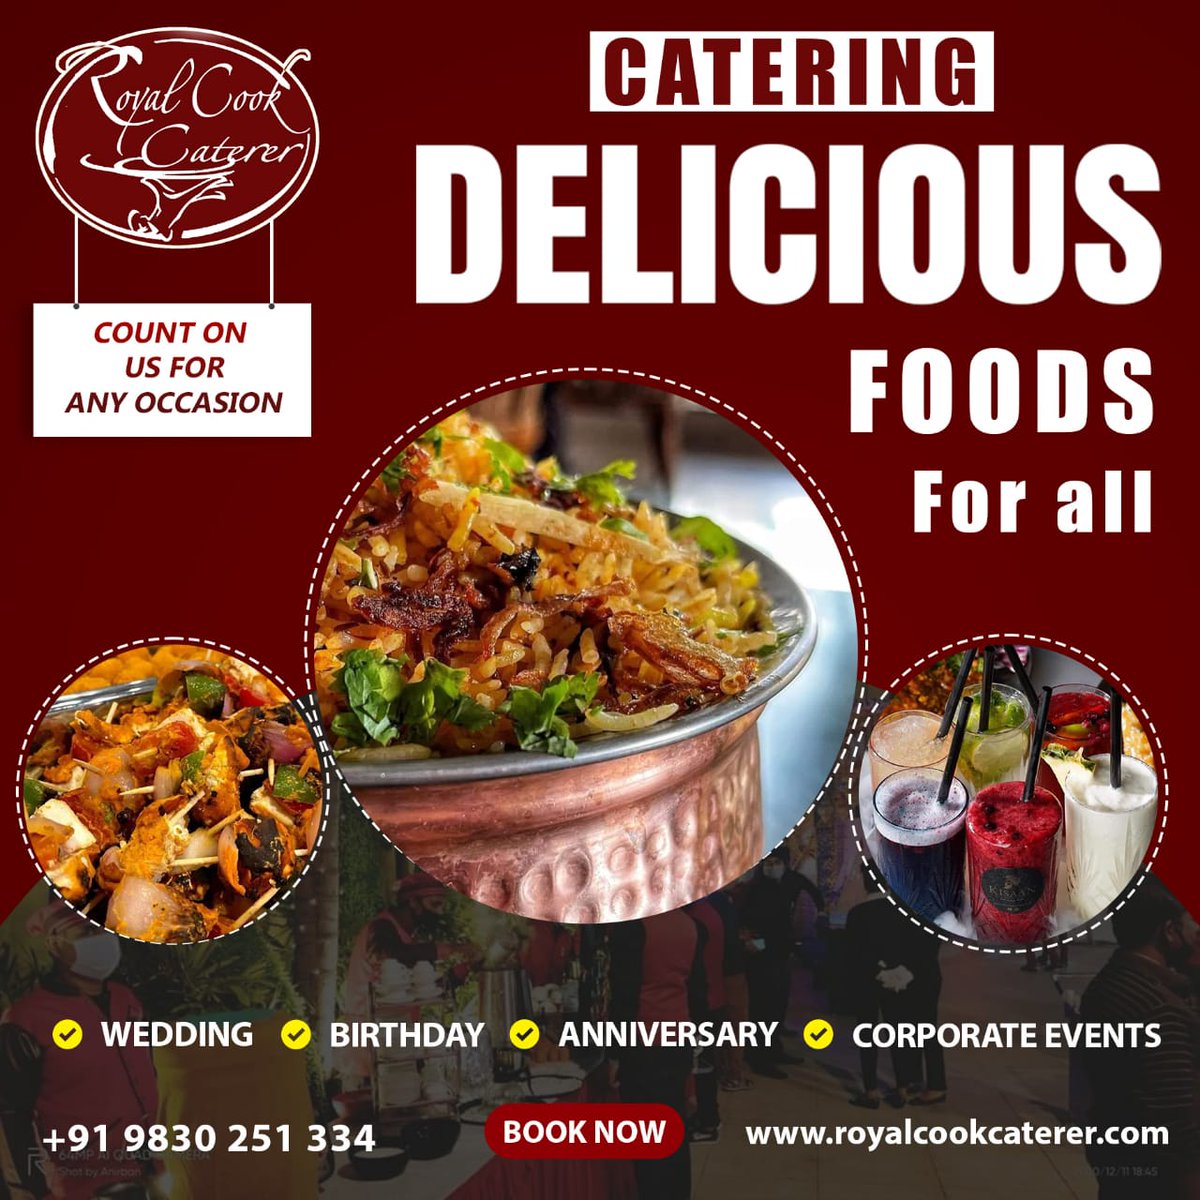 Wedding caterer in kolkata
#catering #food #foodie #wedding #cateringservice #instafood #events #chef #party #delicious #foodstagram #yummy #foodphotography #dinner #healthyfood #foodlover #caterer #weddingplanner #cateringevent #foodblogger #buffet #weddingcatering